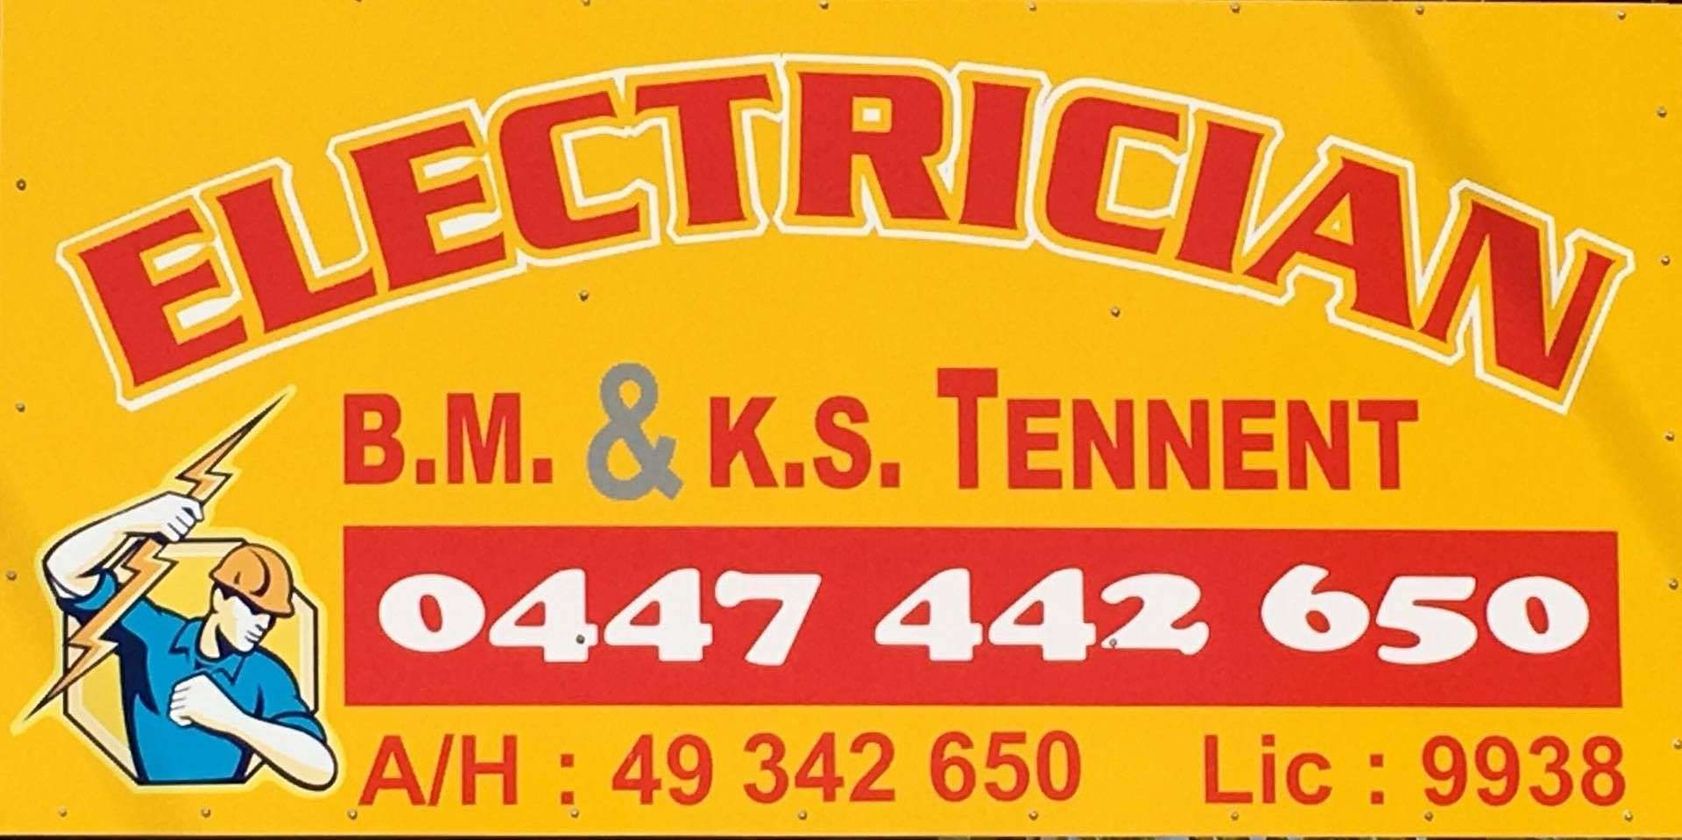 Tennent B M & K S Electrical Contractor featured image